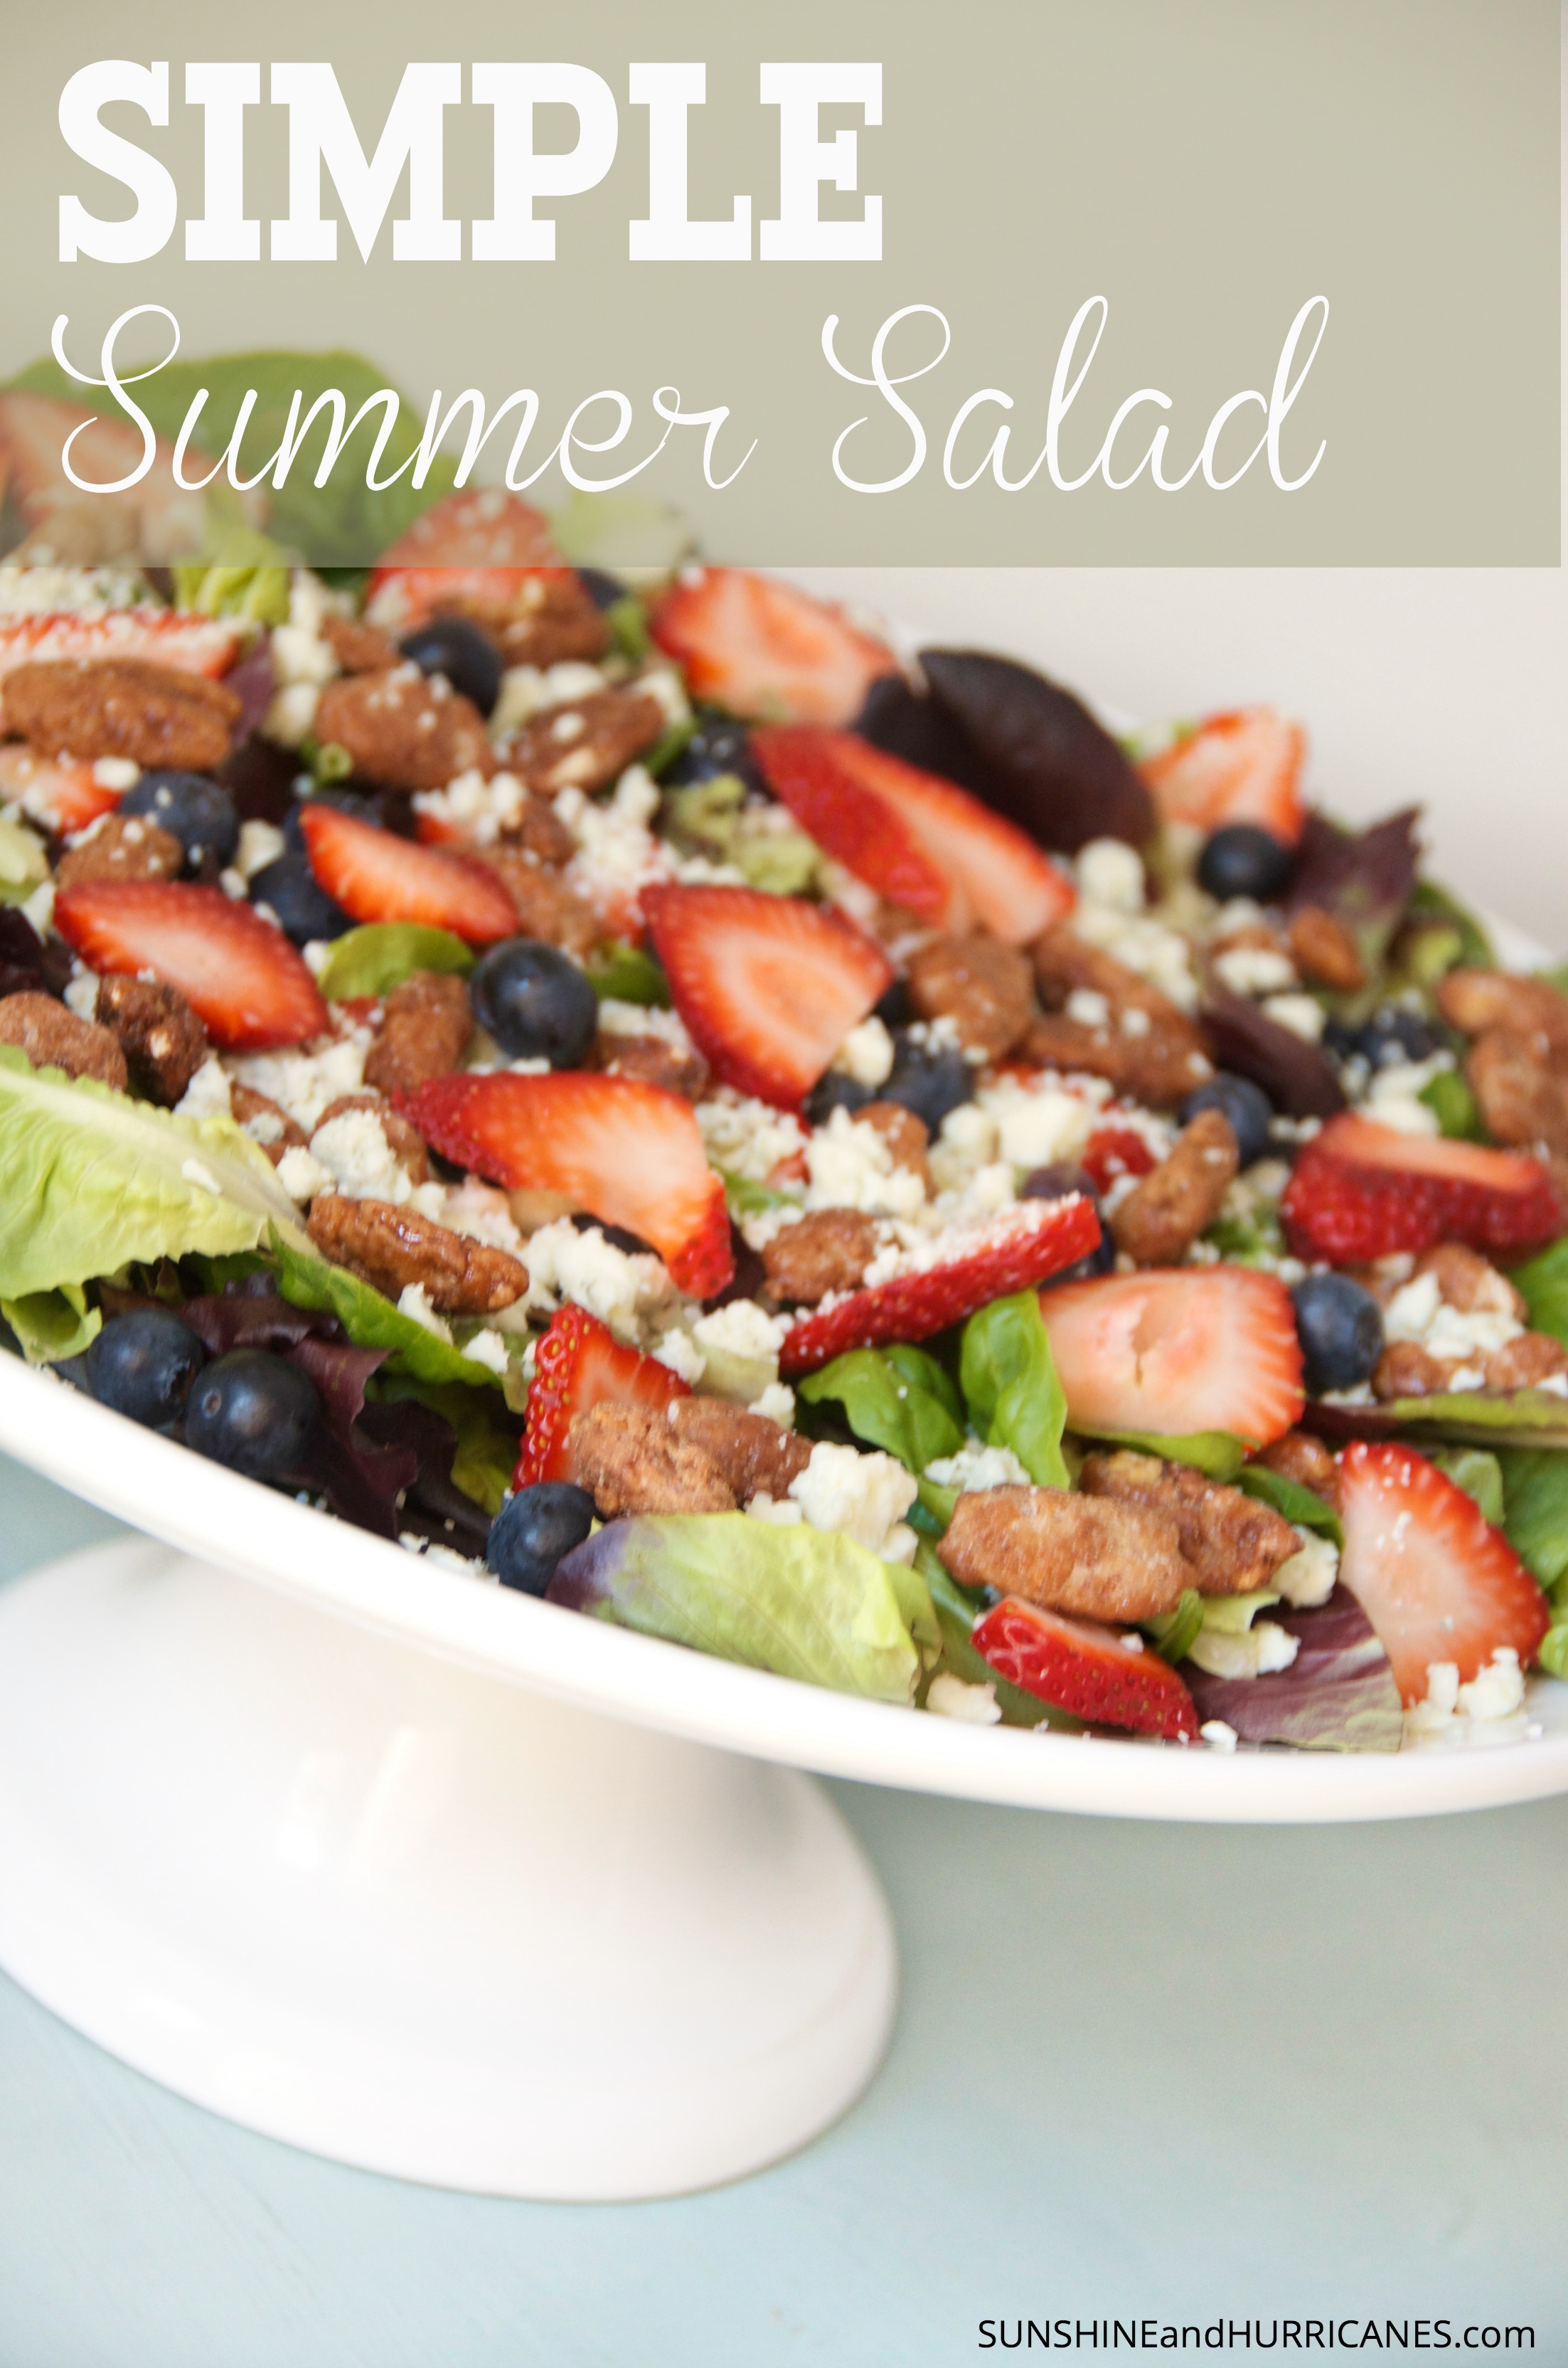 Looking for an easy salad that is sure to please ? Whether you want a light dish for a luncheon or a perfect picnic option, this yummy salad with fresh berries comes together quickly and tastes delicious! Always a favorite for any occasion. Simple Summer Salad. SunshineandHurricanes.com